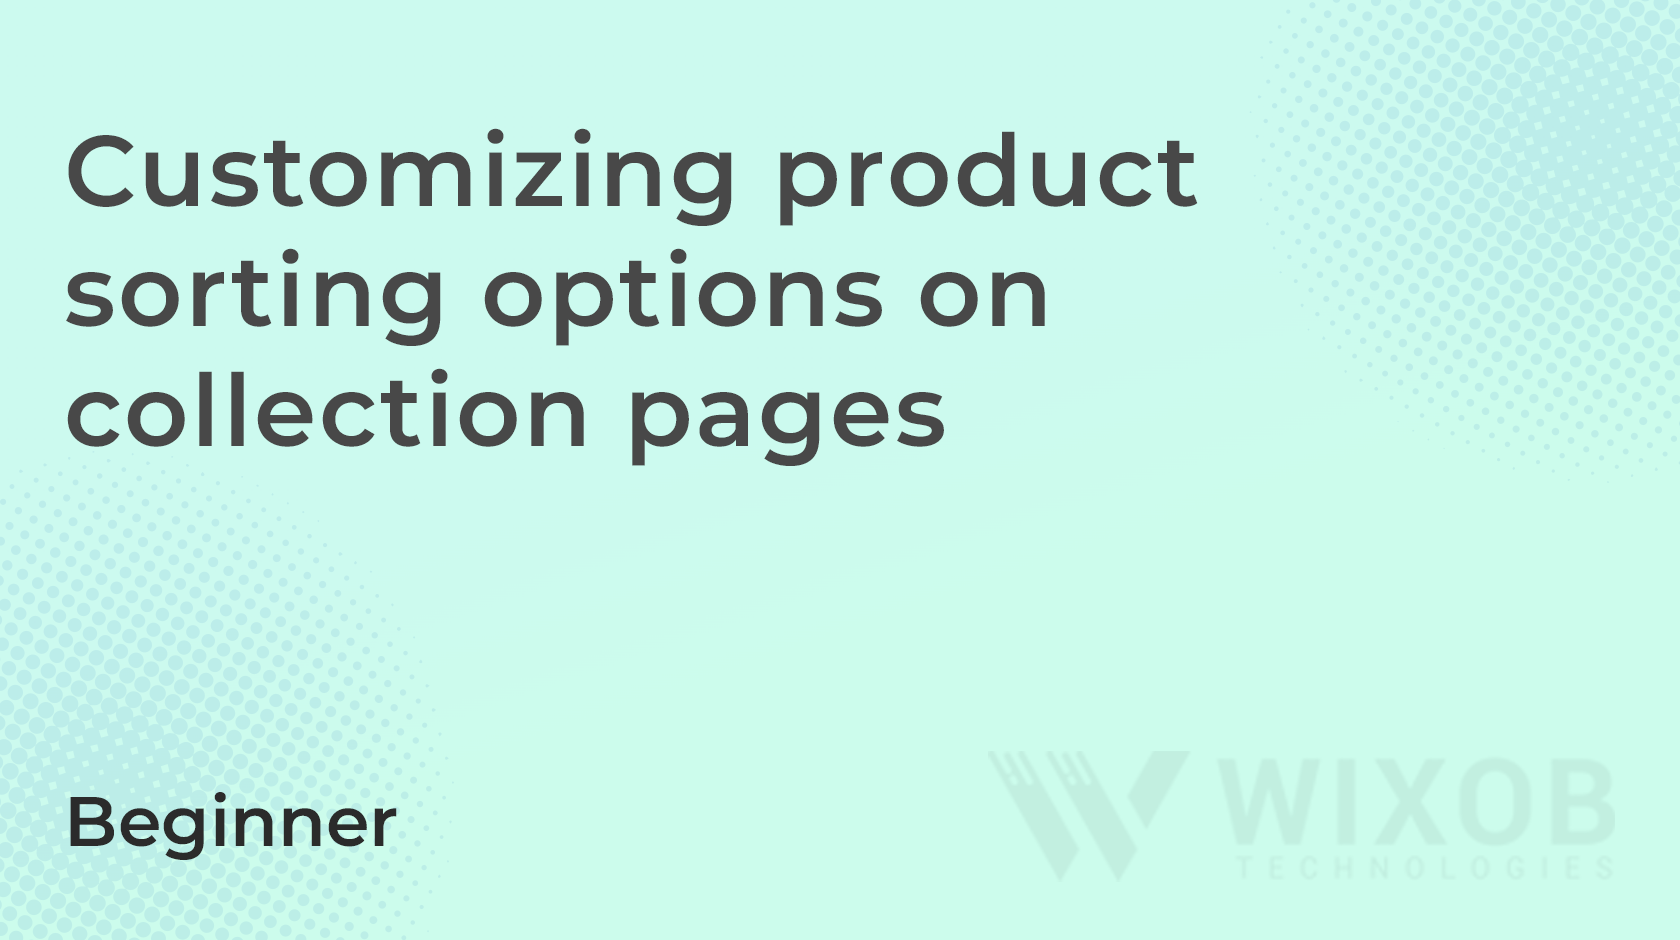 Customizing product sorting options on collection pages